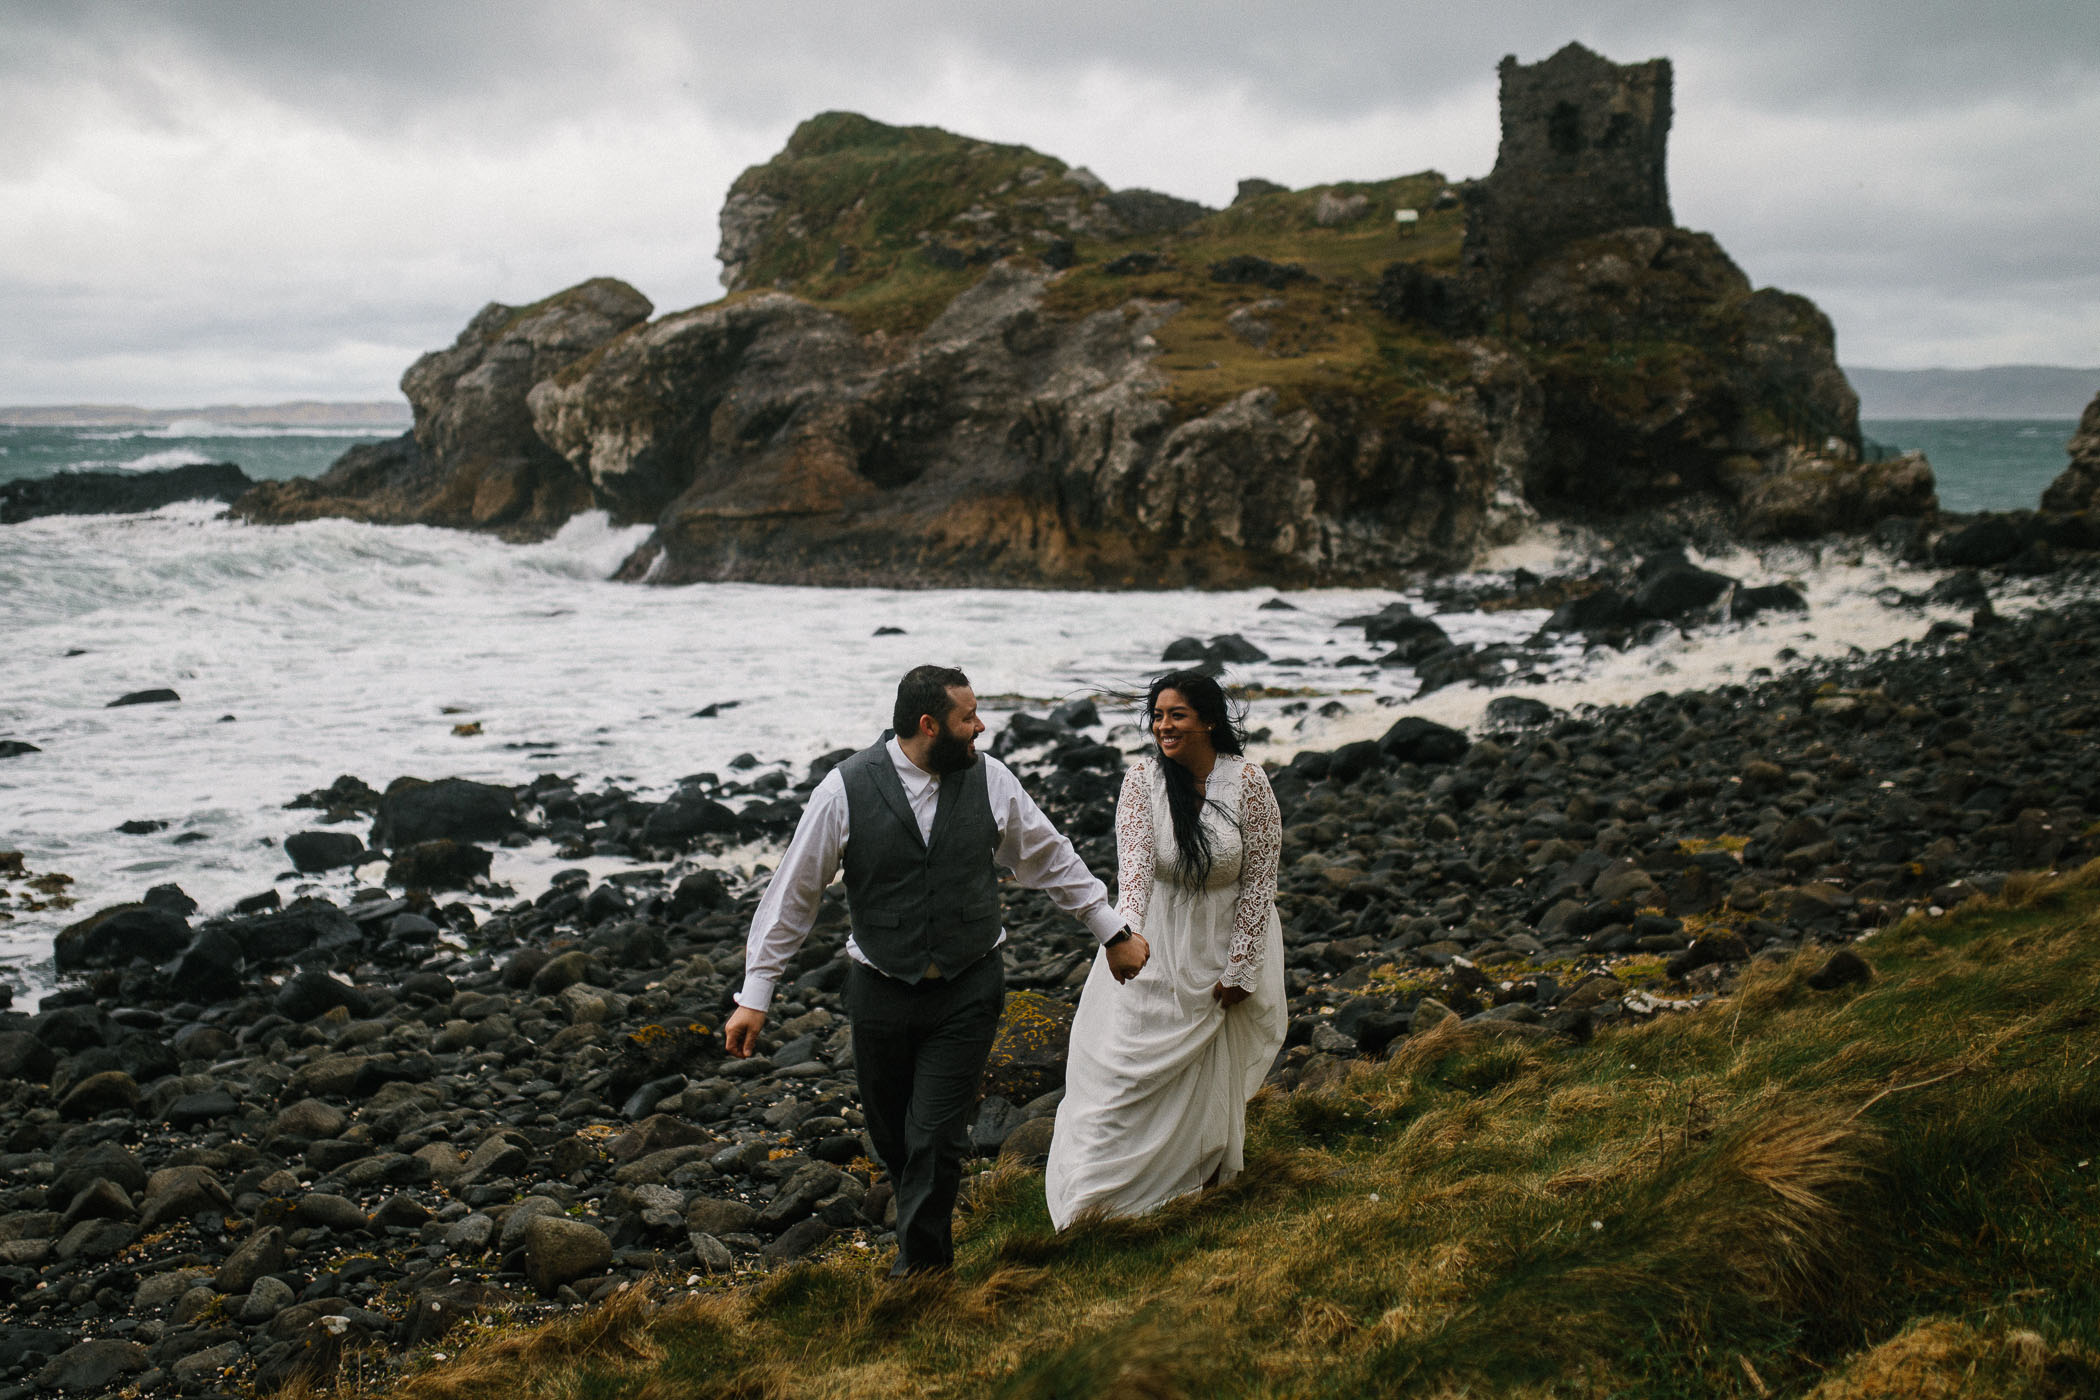 A couple walk along a stony beach with the sea behind them and a ruined building on a rocky outcrop. By Luke Flint Photography